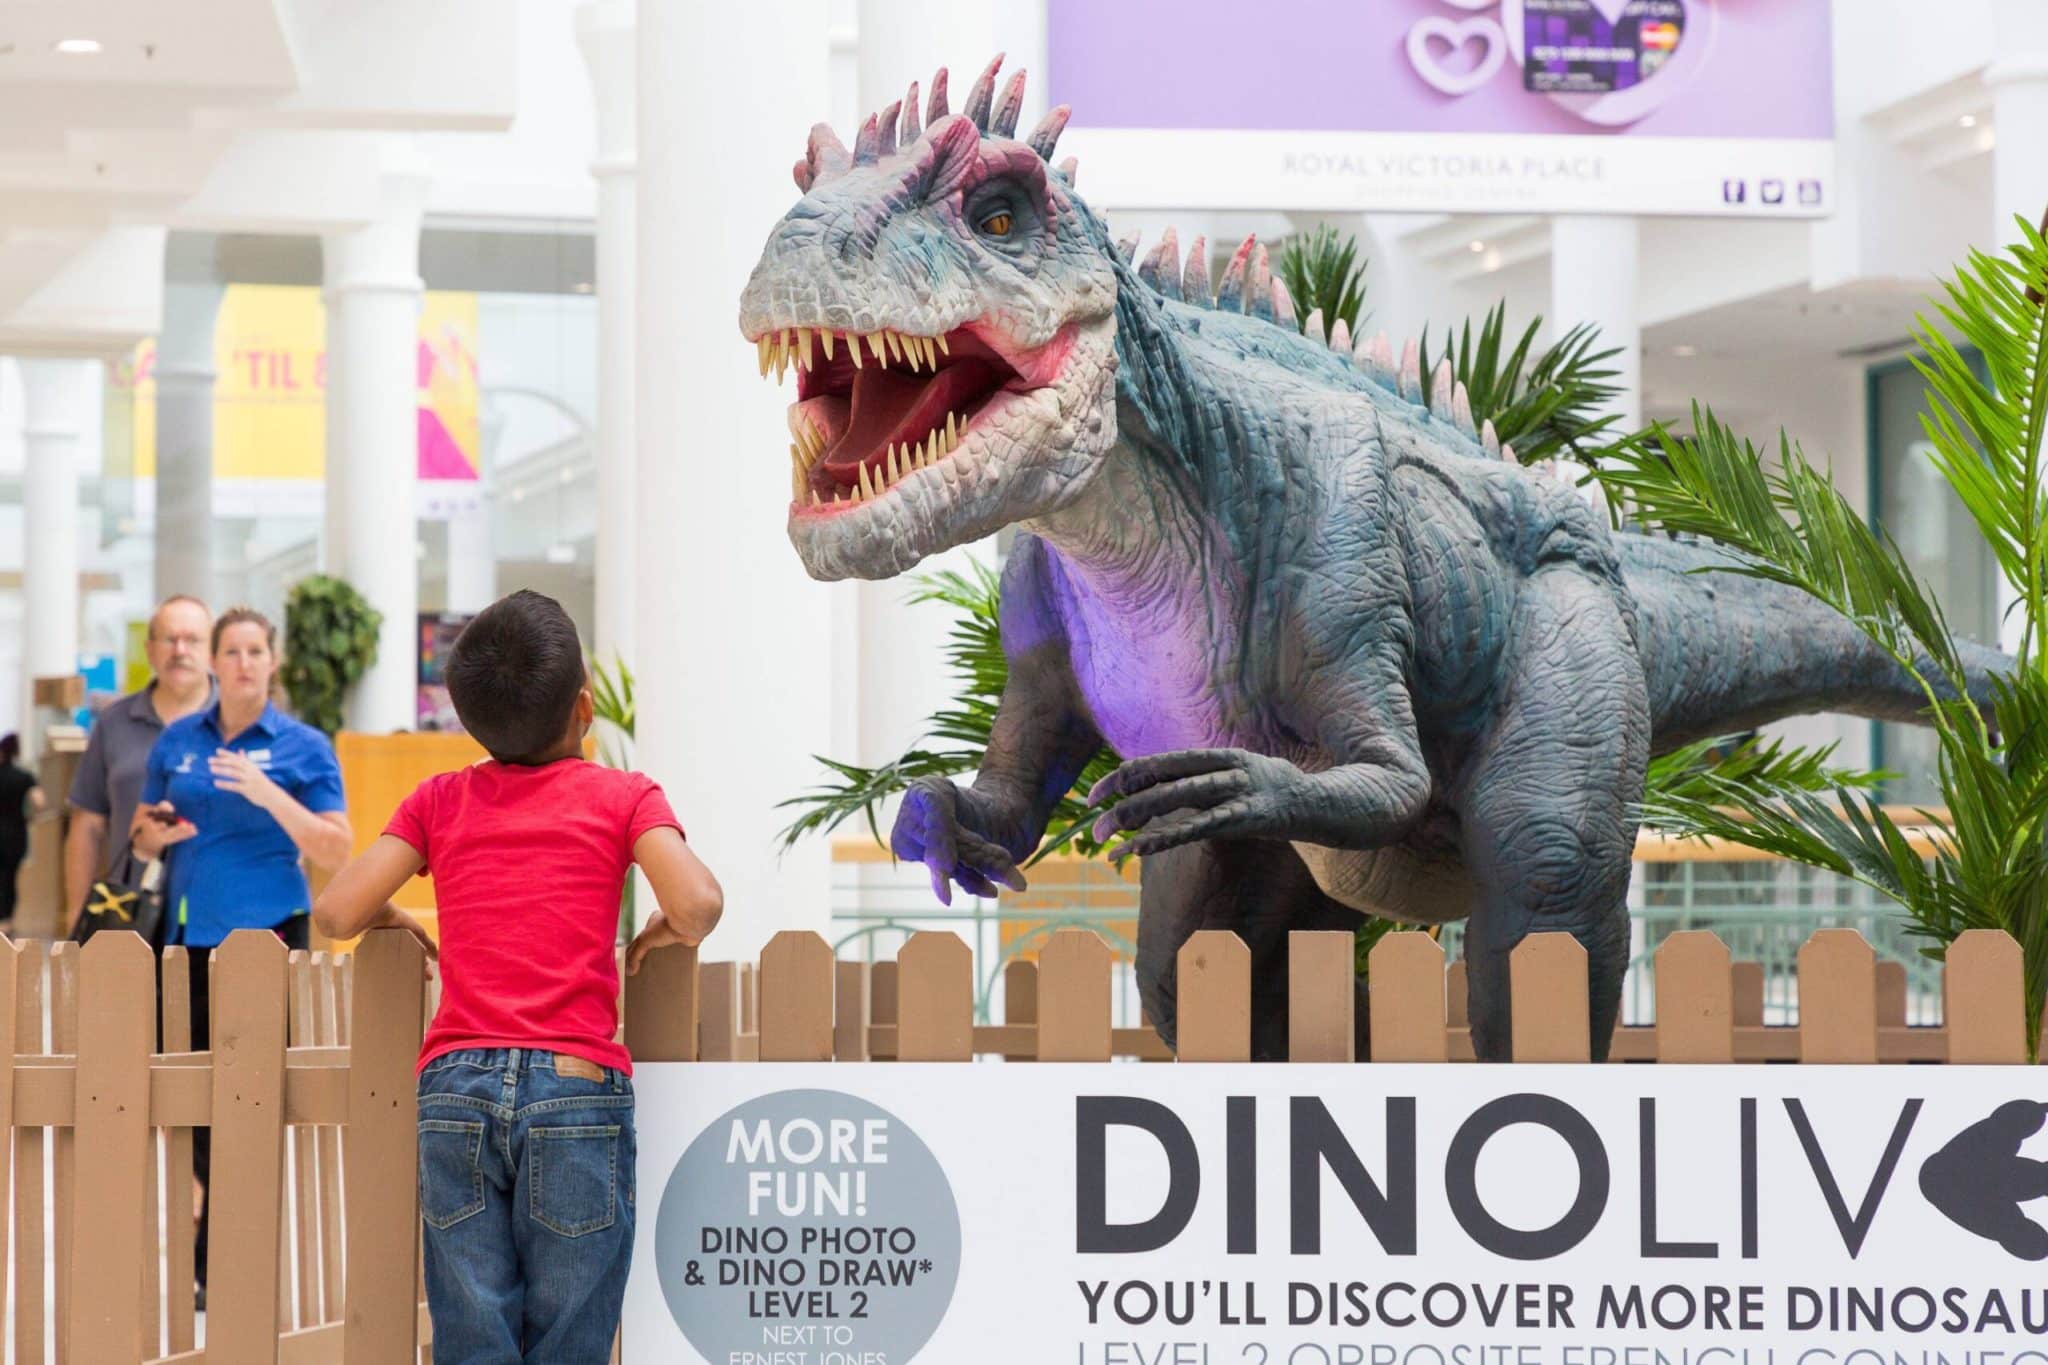 Dino Live draws in shoppers